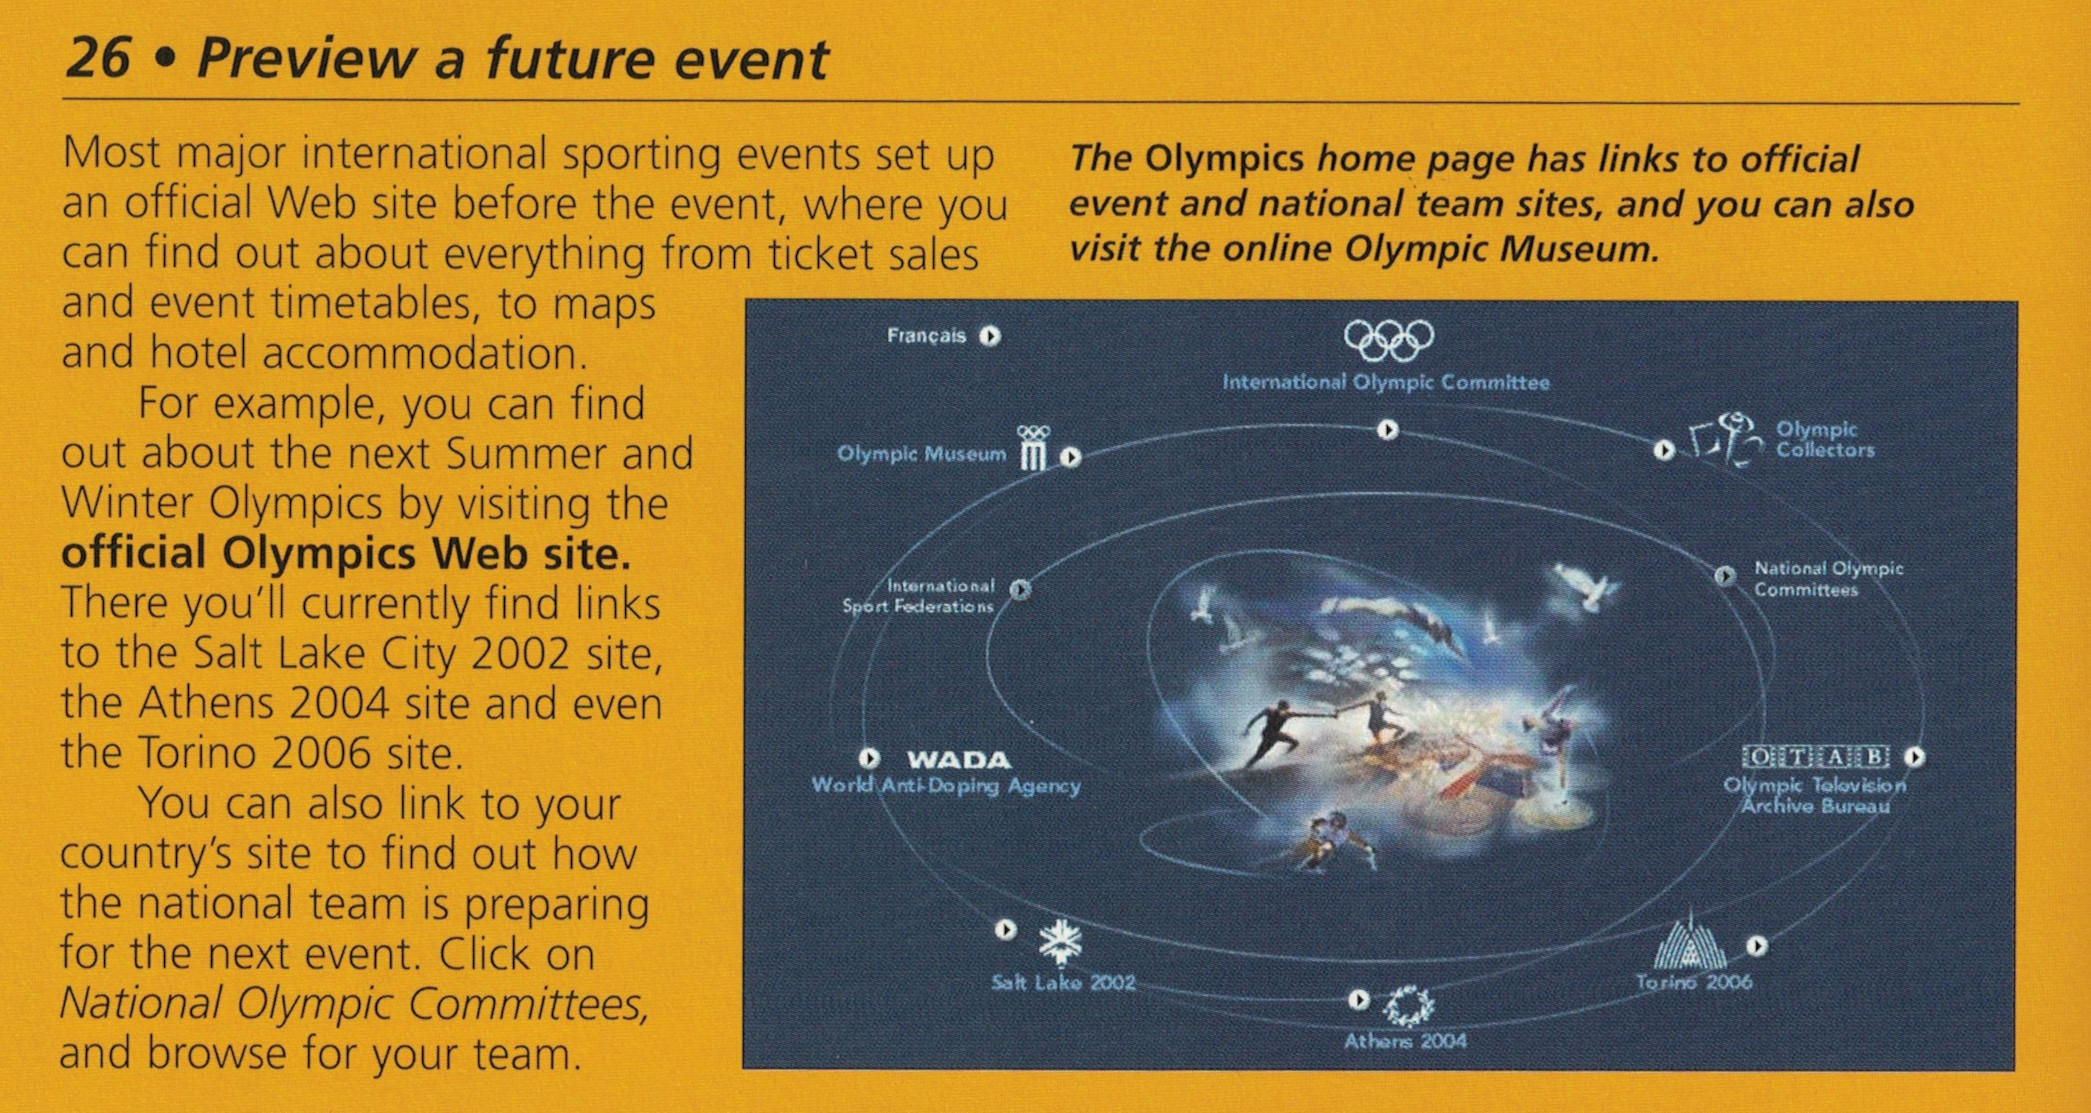 101 things to do on the internet page 22 predict a future event